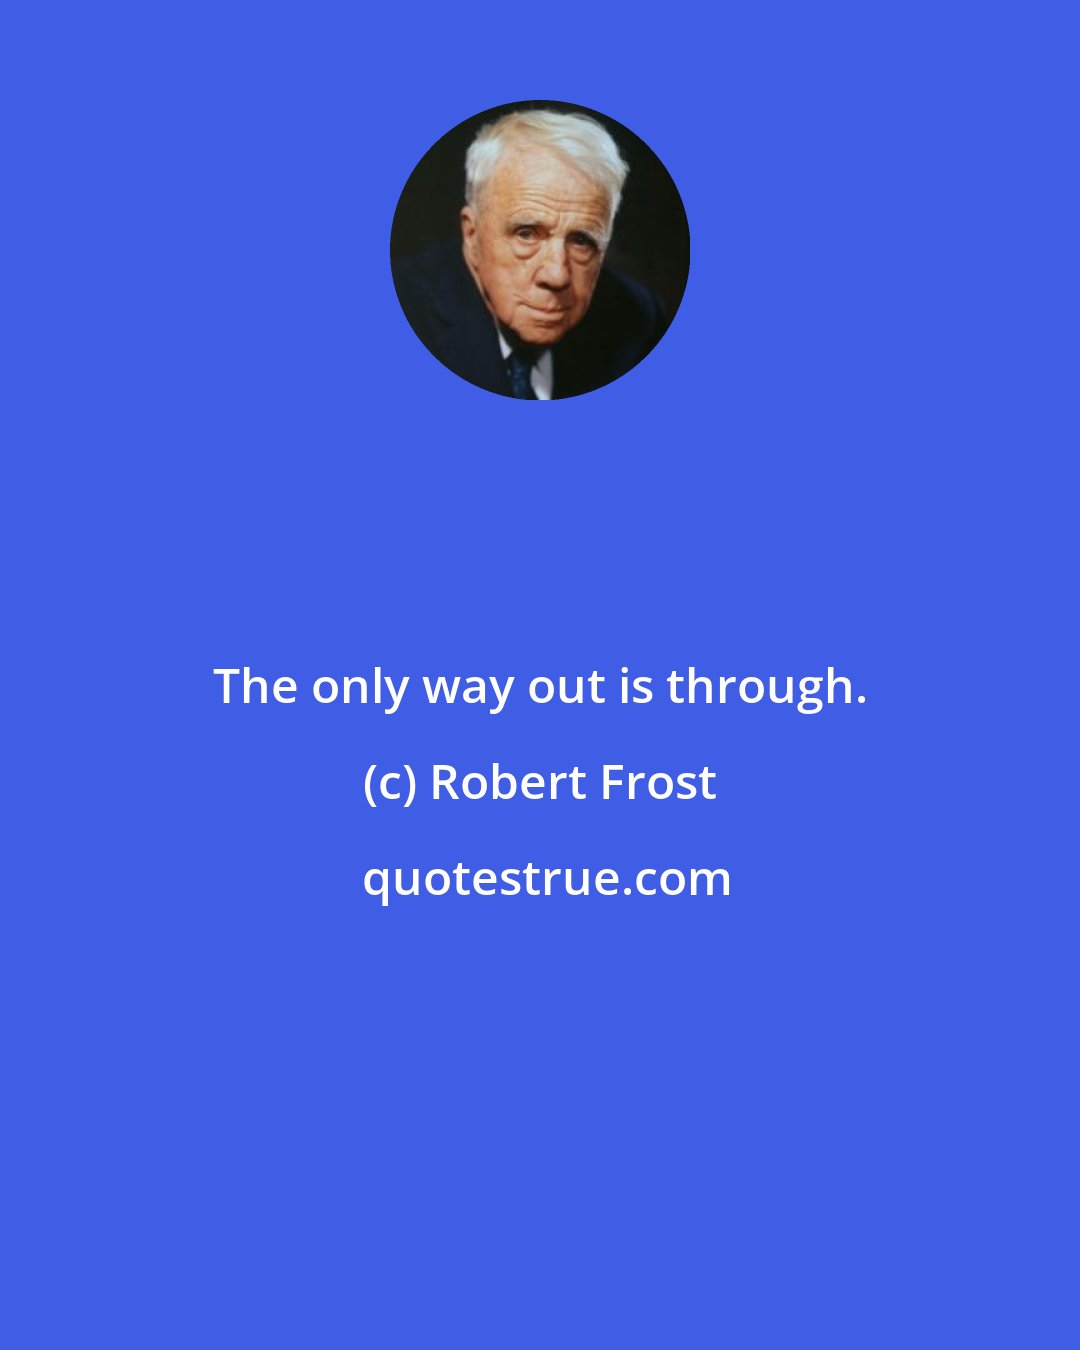 Robert Frost: The only way out is through.